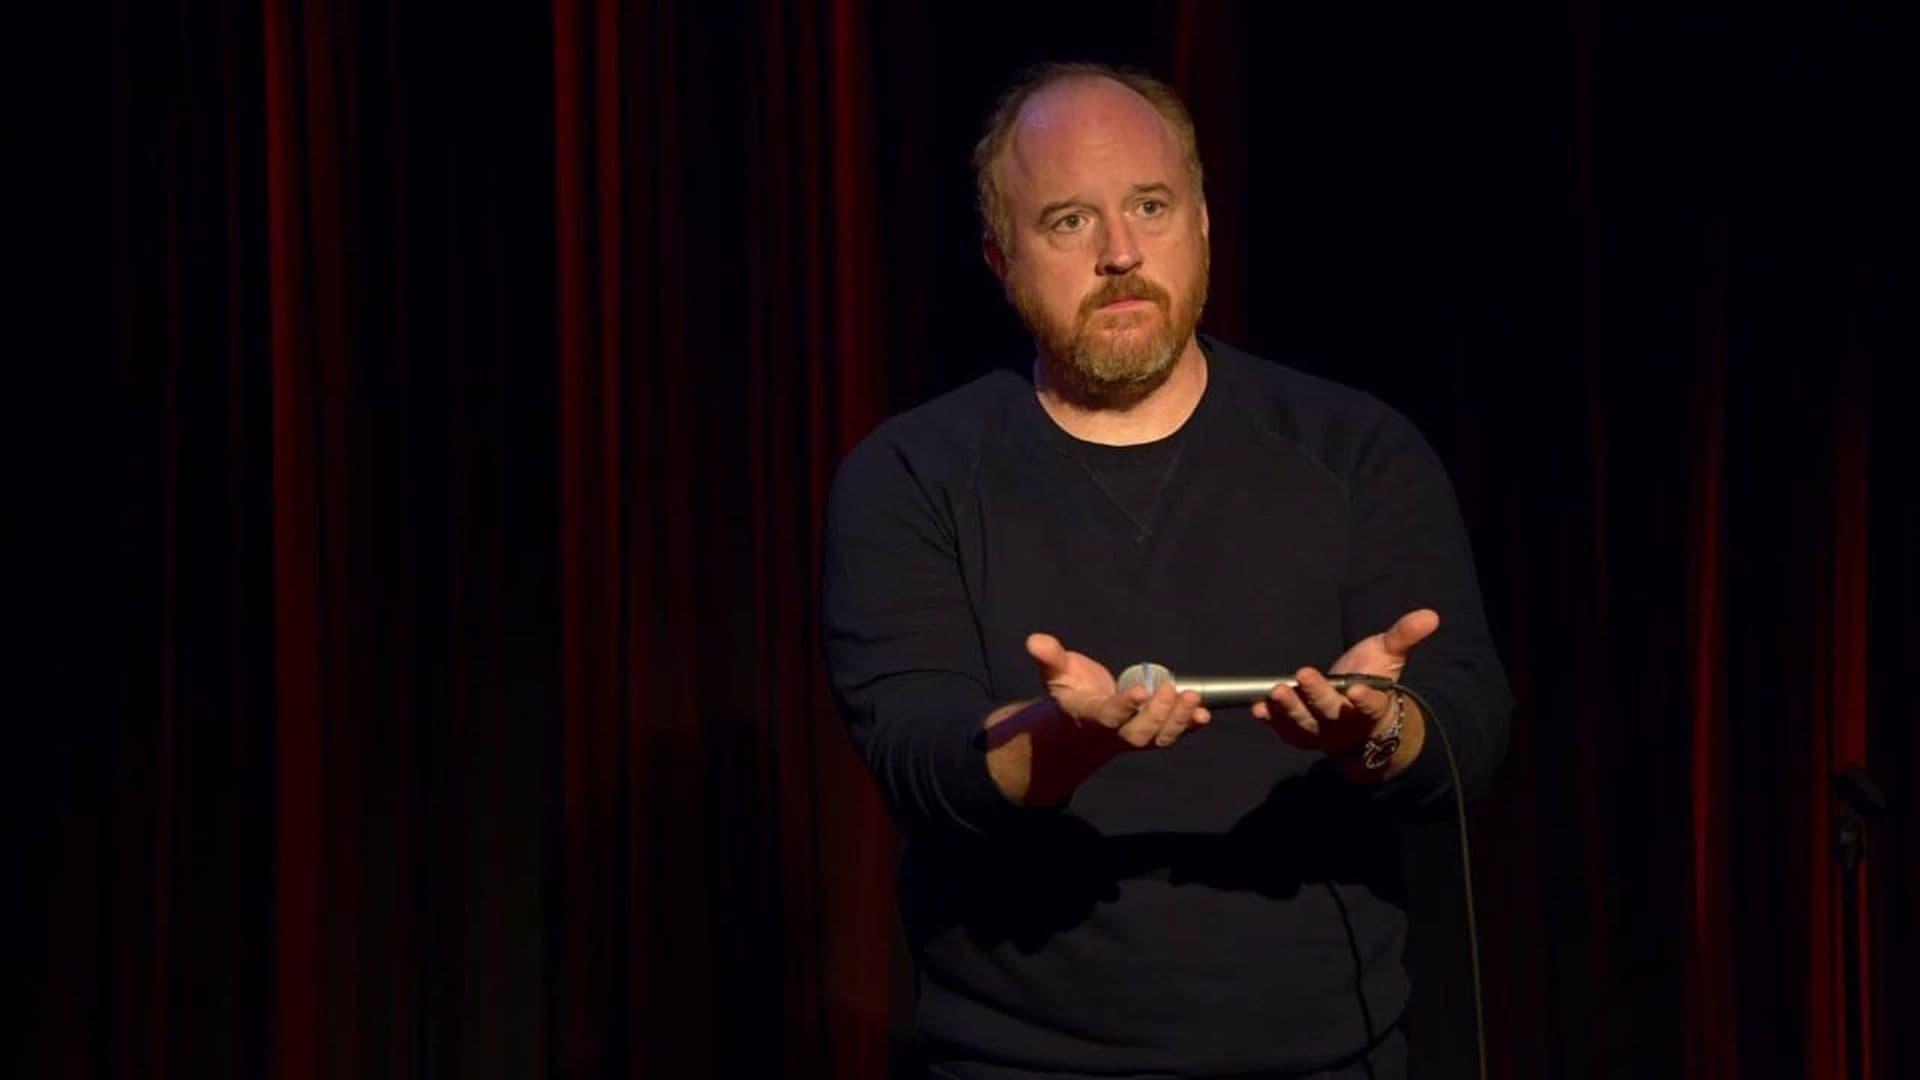 Louis C.K.: Live at The Comedy Store backdrop